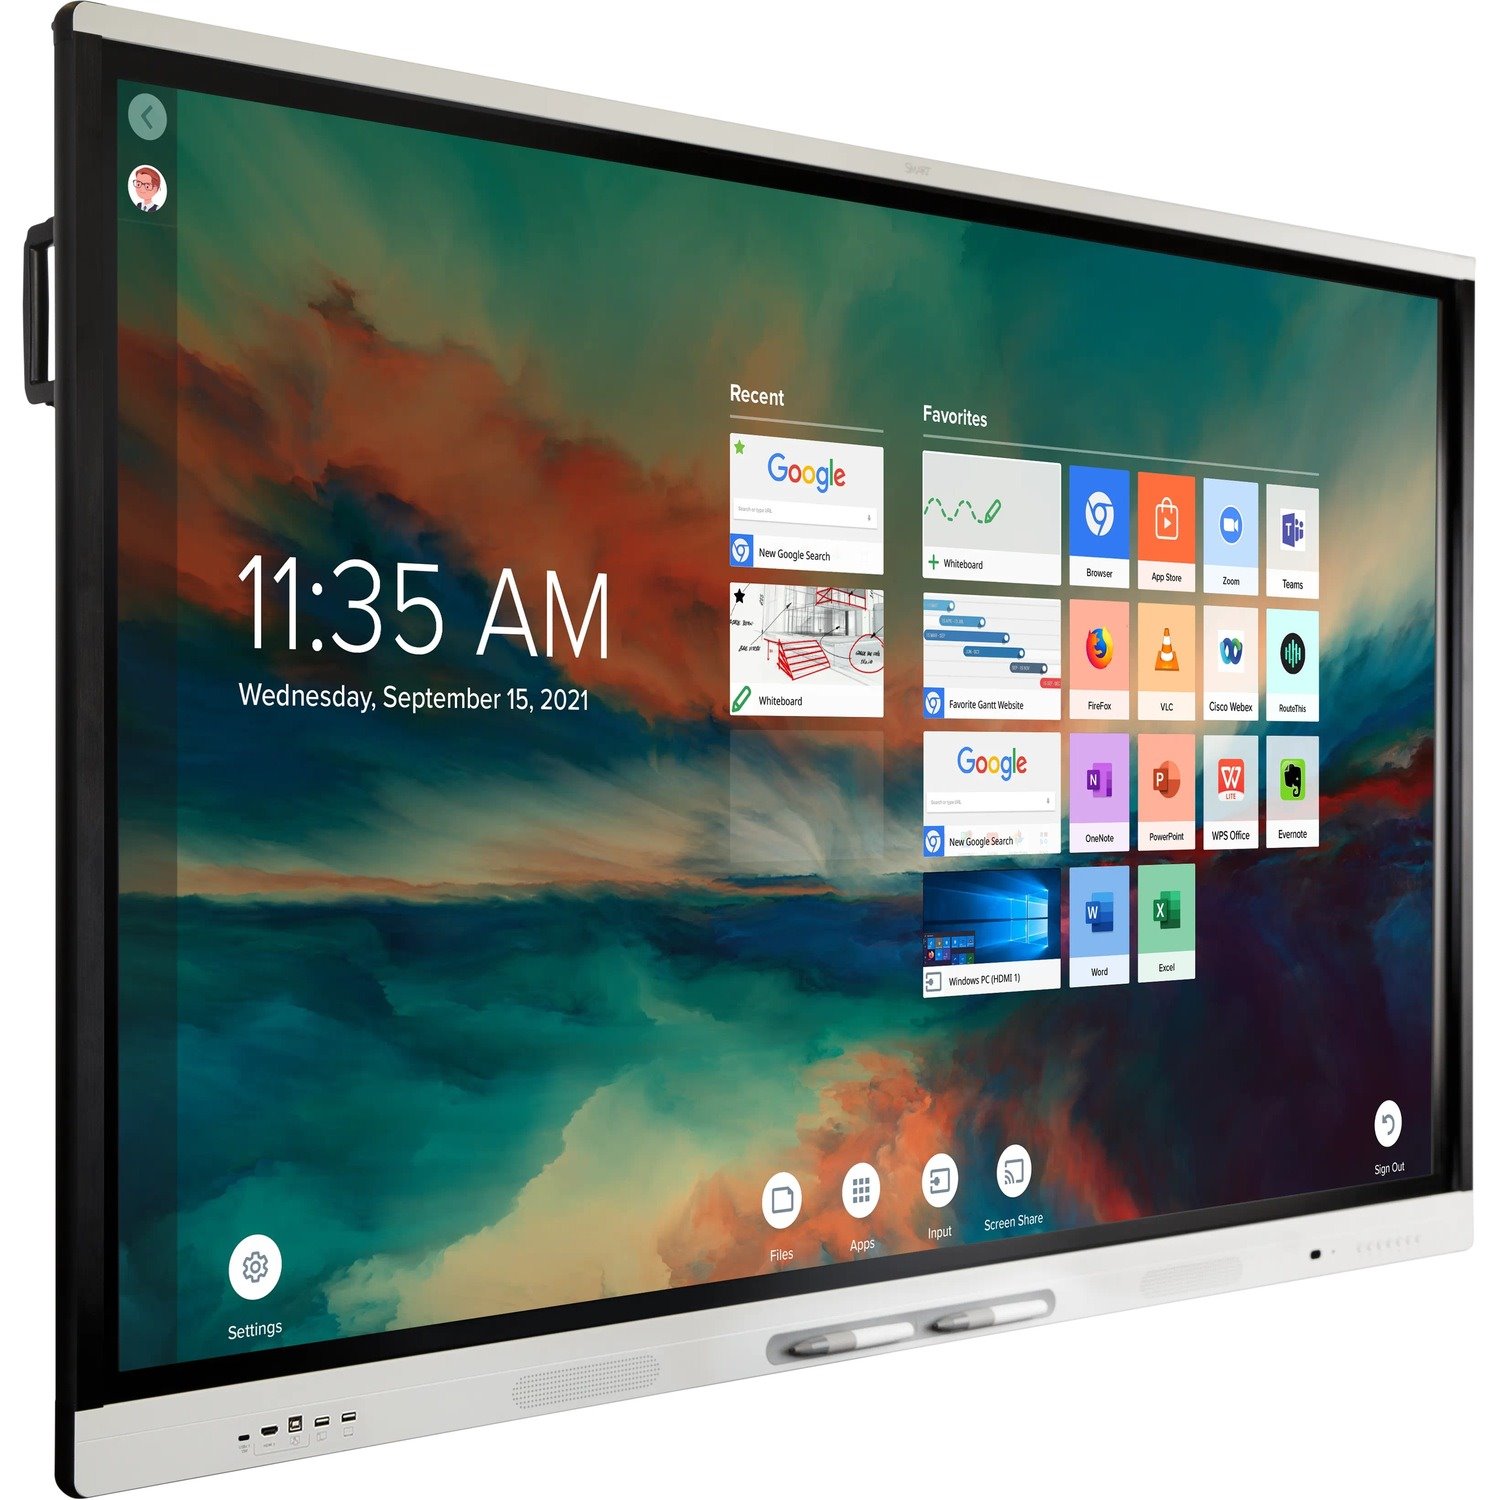 SMART Board MX055-V3 Pro Series Interactive Display with iQ - White, No HDMI Out